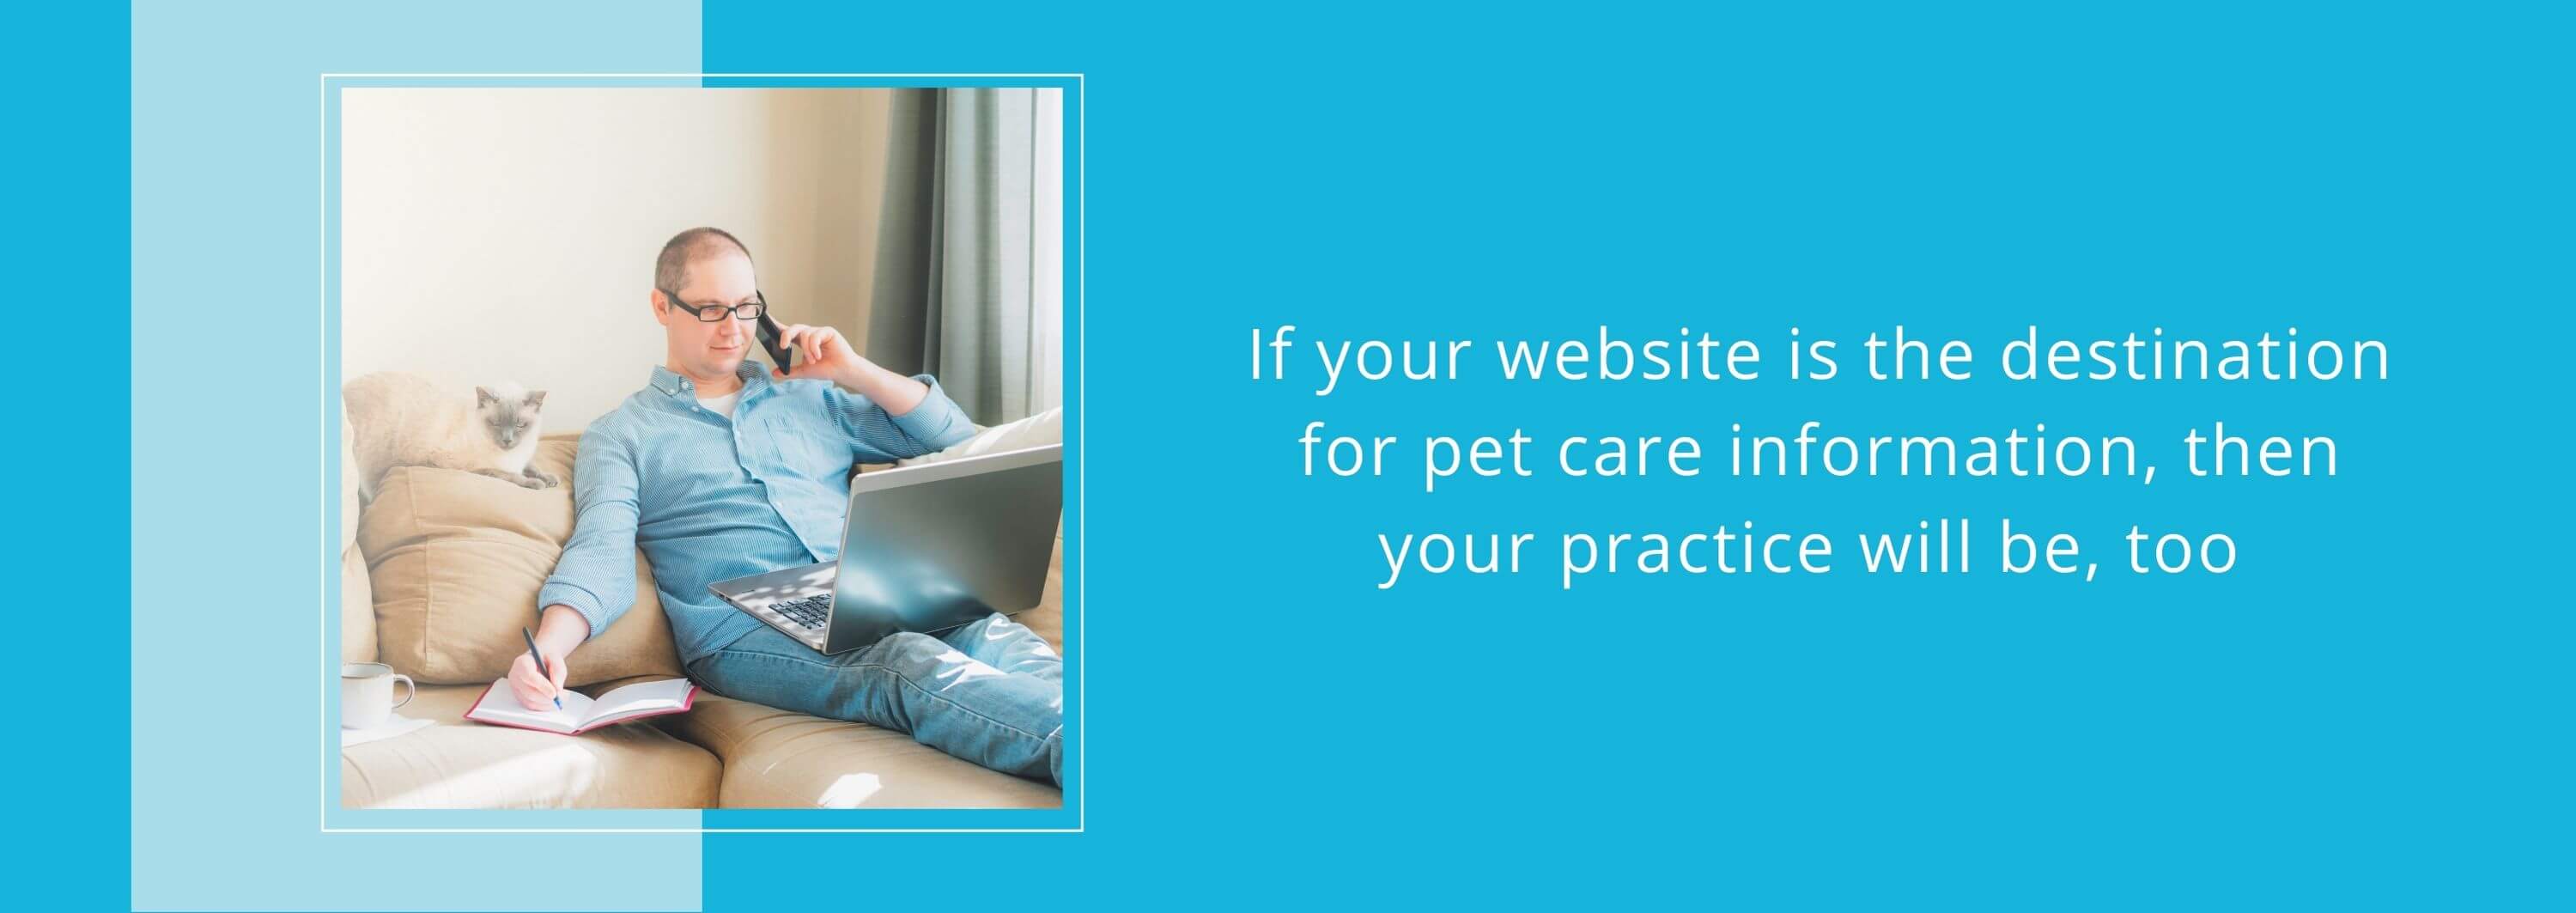 If your website is the destination for pet care information, then your practice will be, too